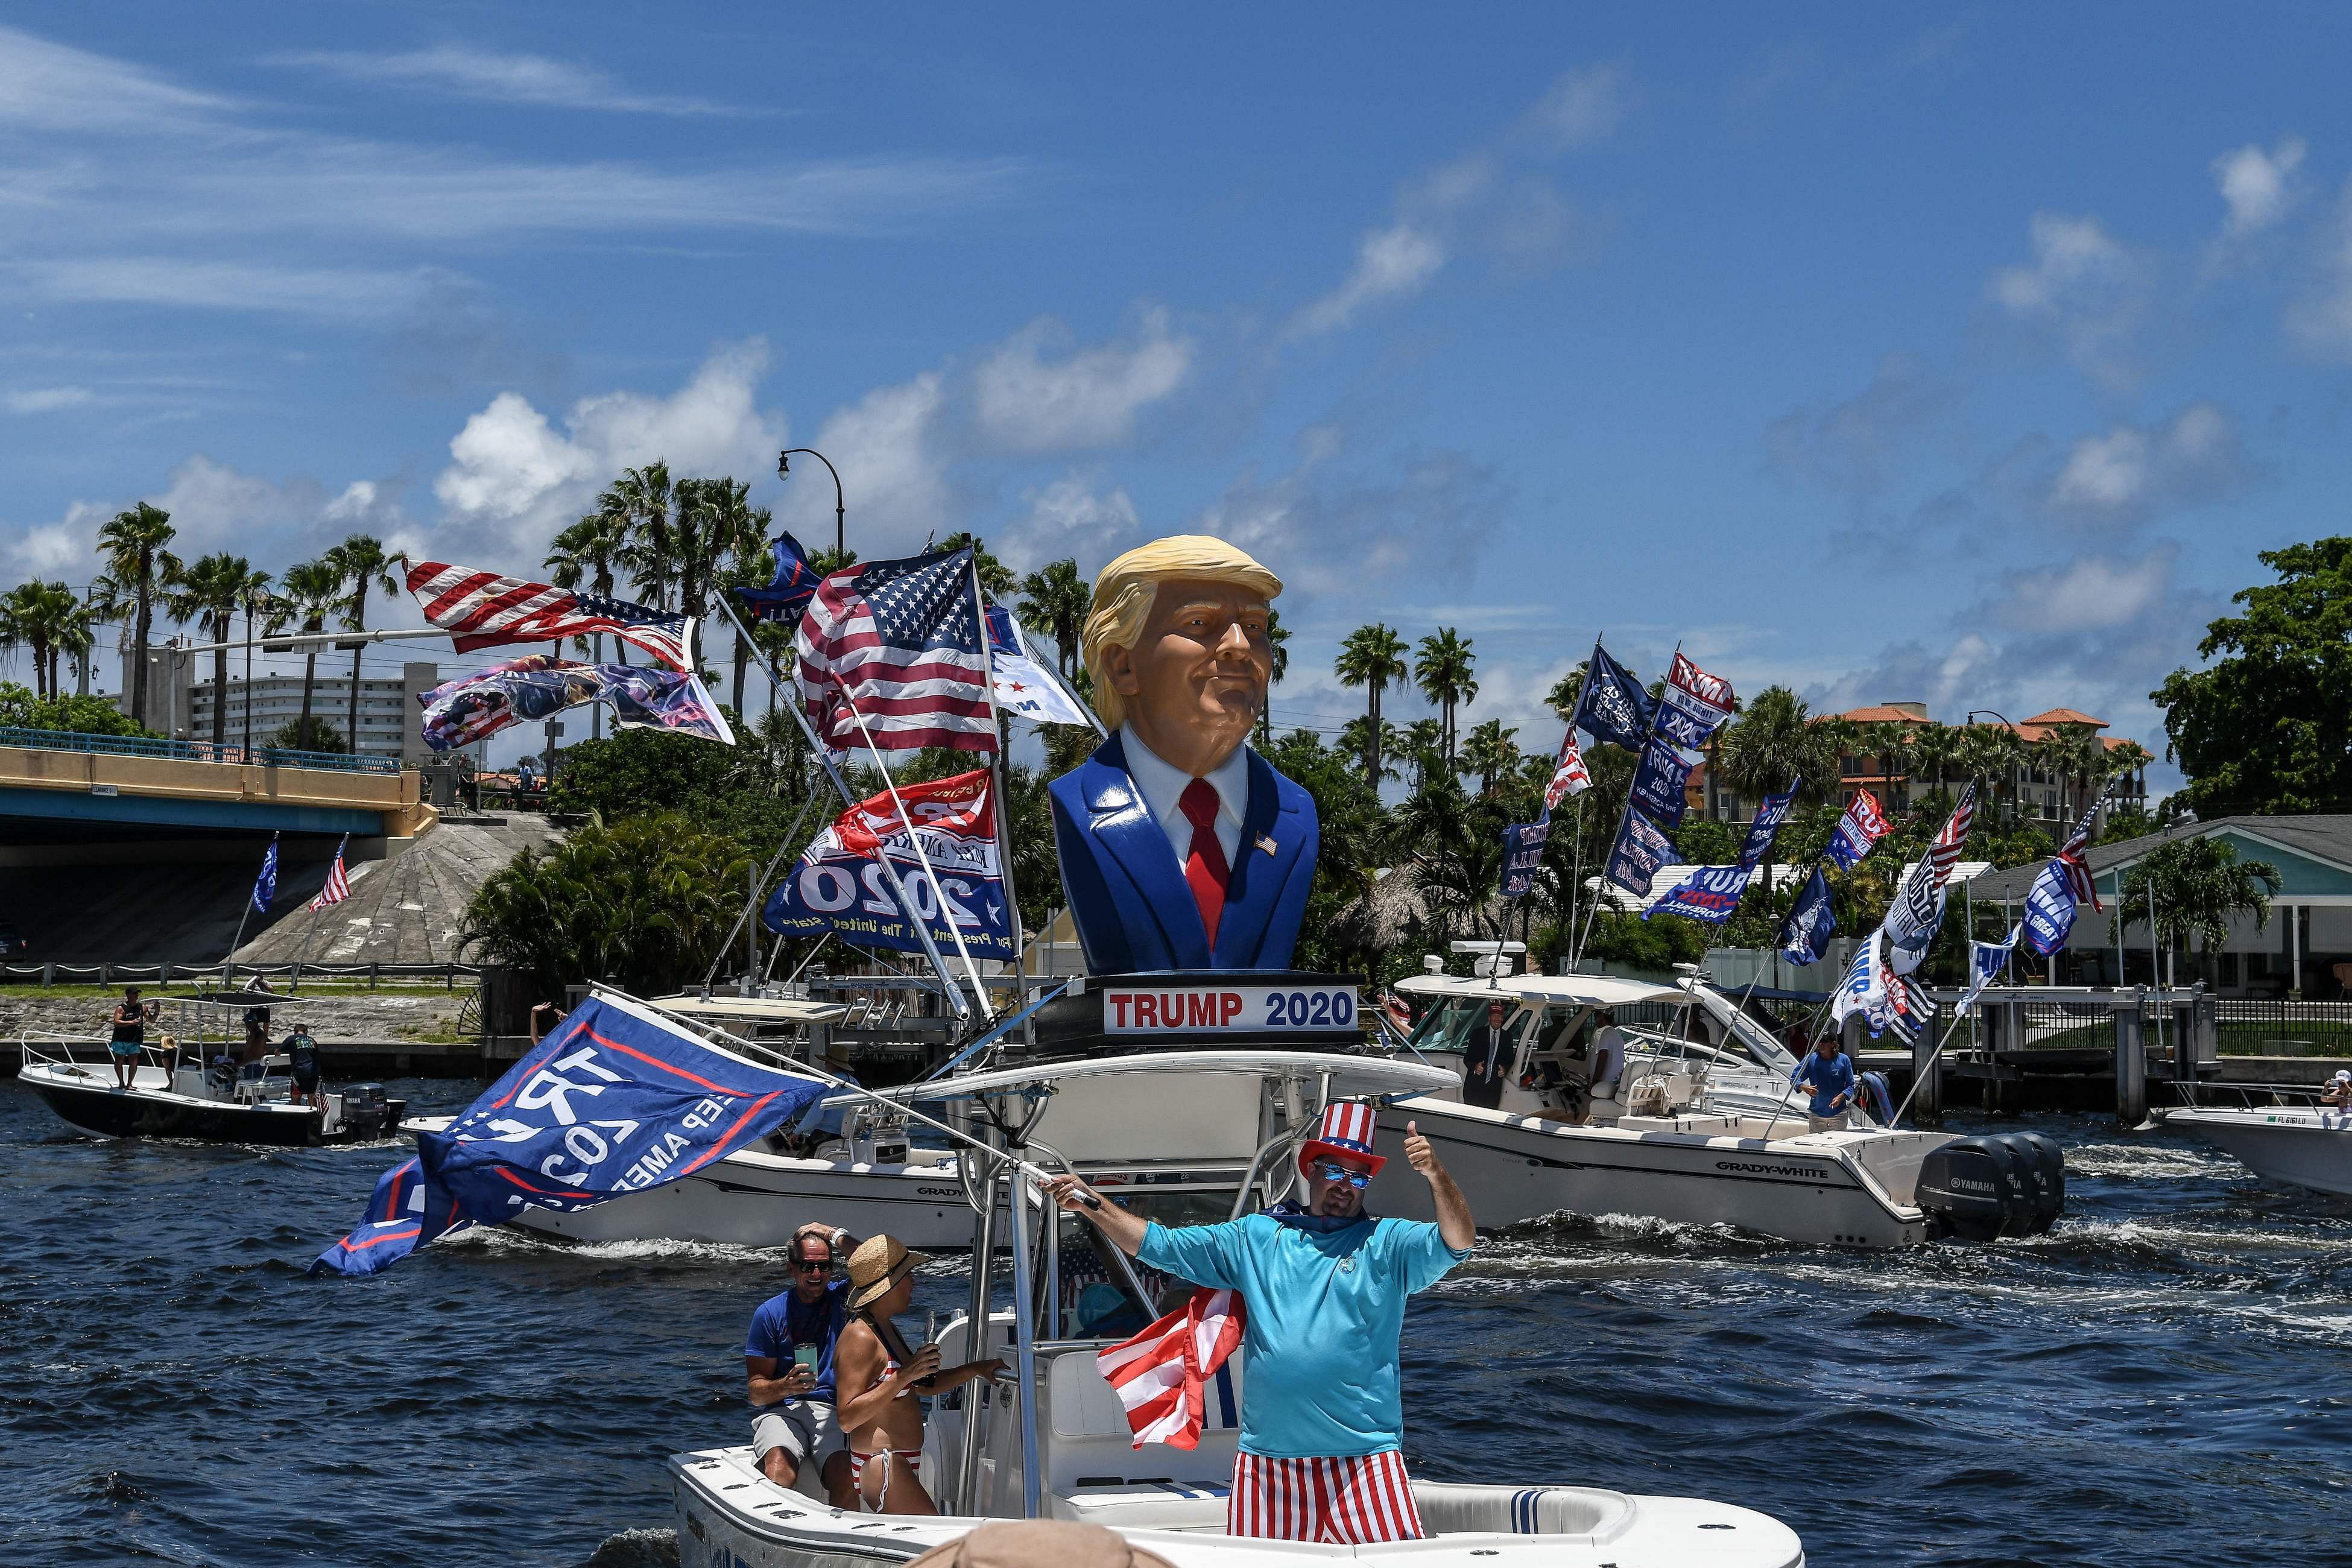 Further north in Jacksonville, about 1,000 boats participated in the Trumptillas, according to official Duval County estimates. Credit: AFP Photo